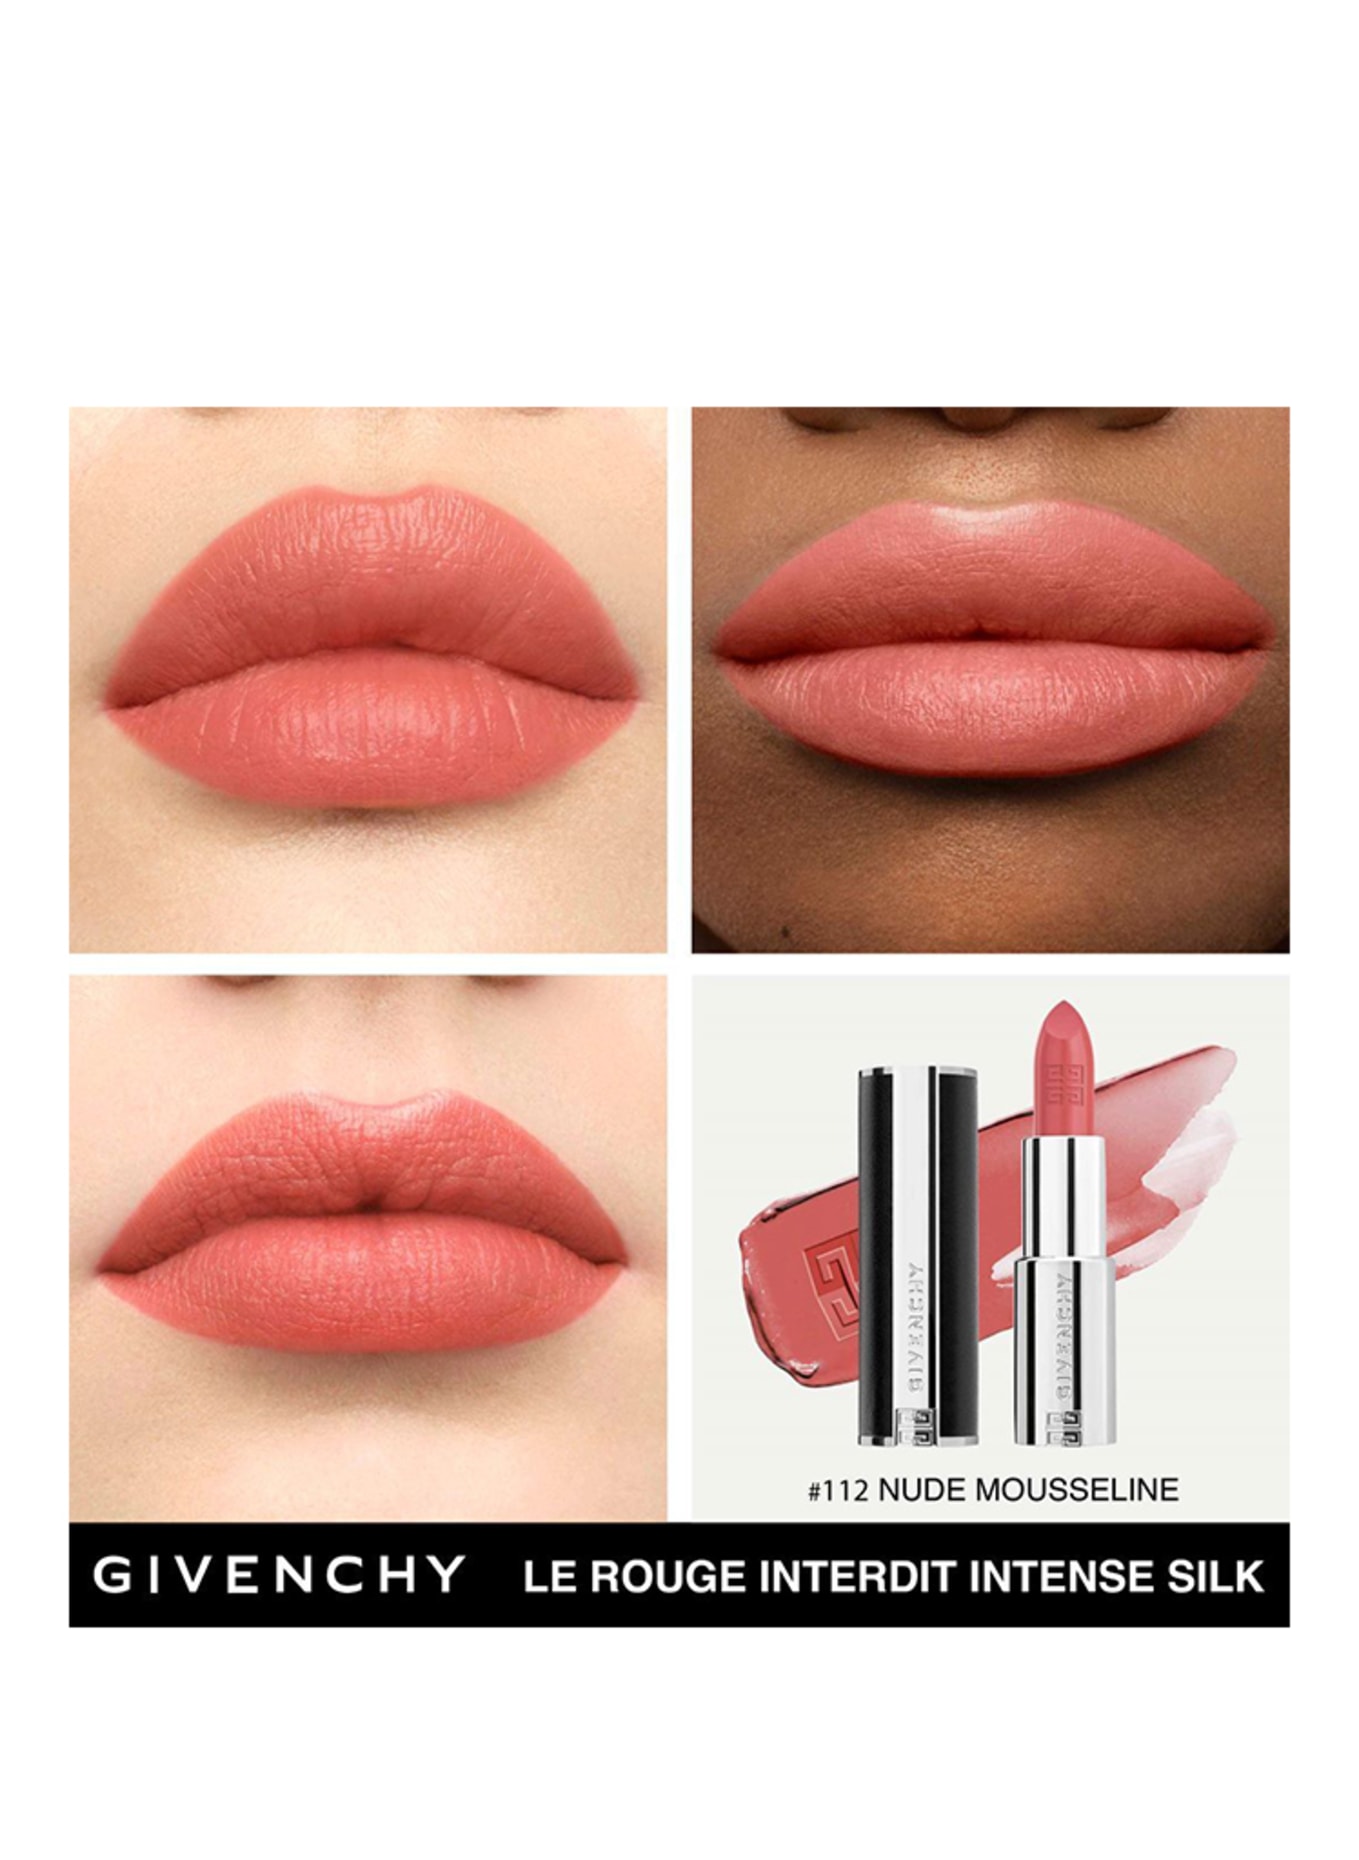 GIVENCHY BEAUTY LE ROUGE INTERDIT INTENSE SILK, Farbe: N112 NUDE MOUSSELINE (Bild 3)